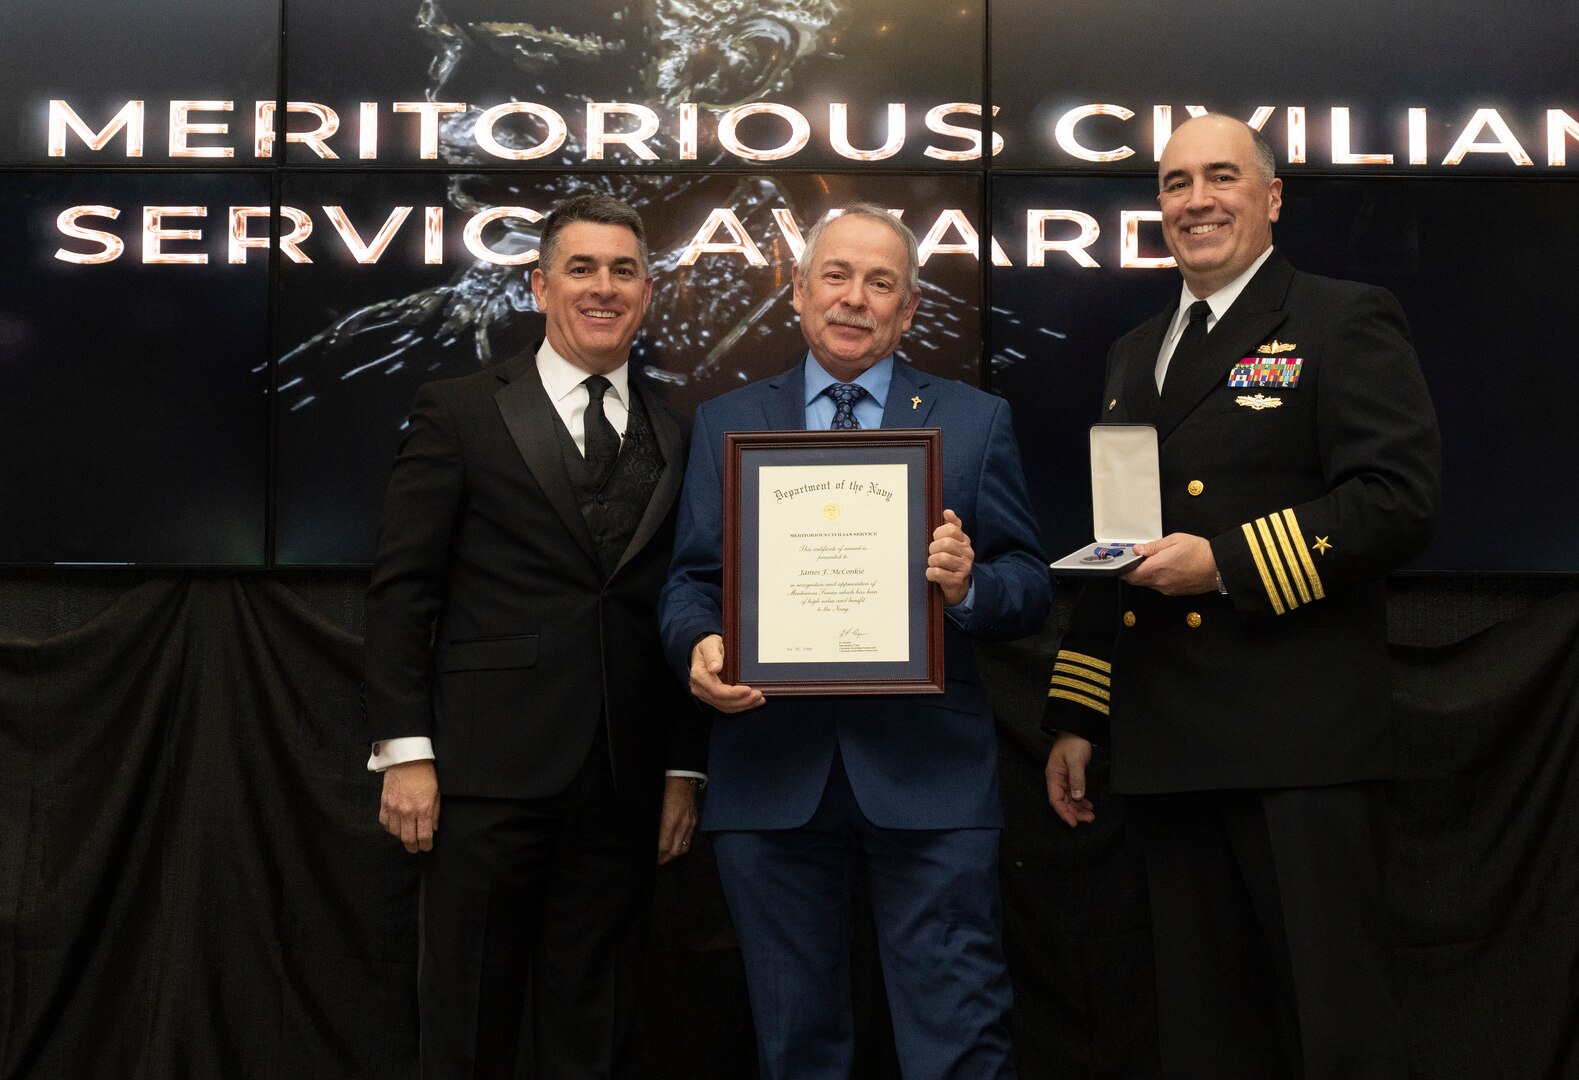 IMAGE: Naval Surface Warfare Center Dahlgren Division (NSWCDD) Technical Director Dale Sisson Jr., SES, and Commanding Officer Capt. Philip Mlynarski presented James McConkie with the Navy Meritorious Civilian Service Award during the NSWCDD Annual Honorary Awards ceremony at the Fredericksburg Expo Center March 10.